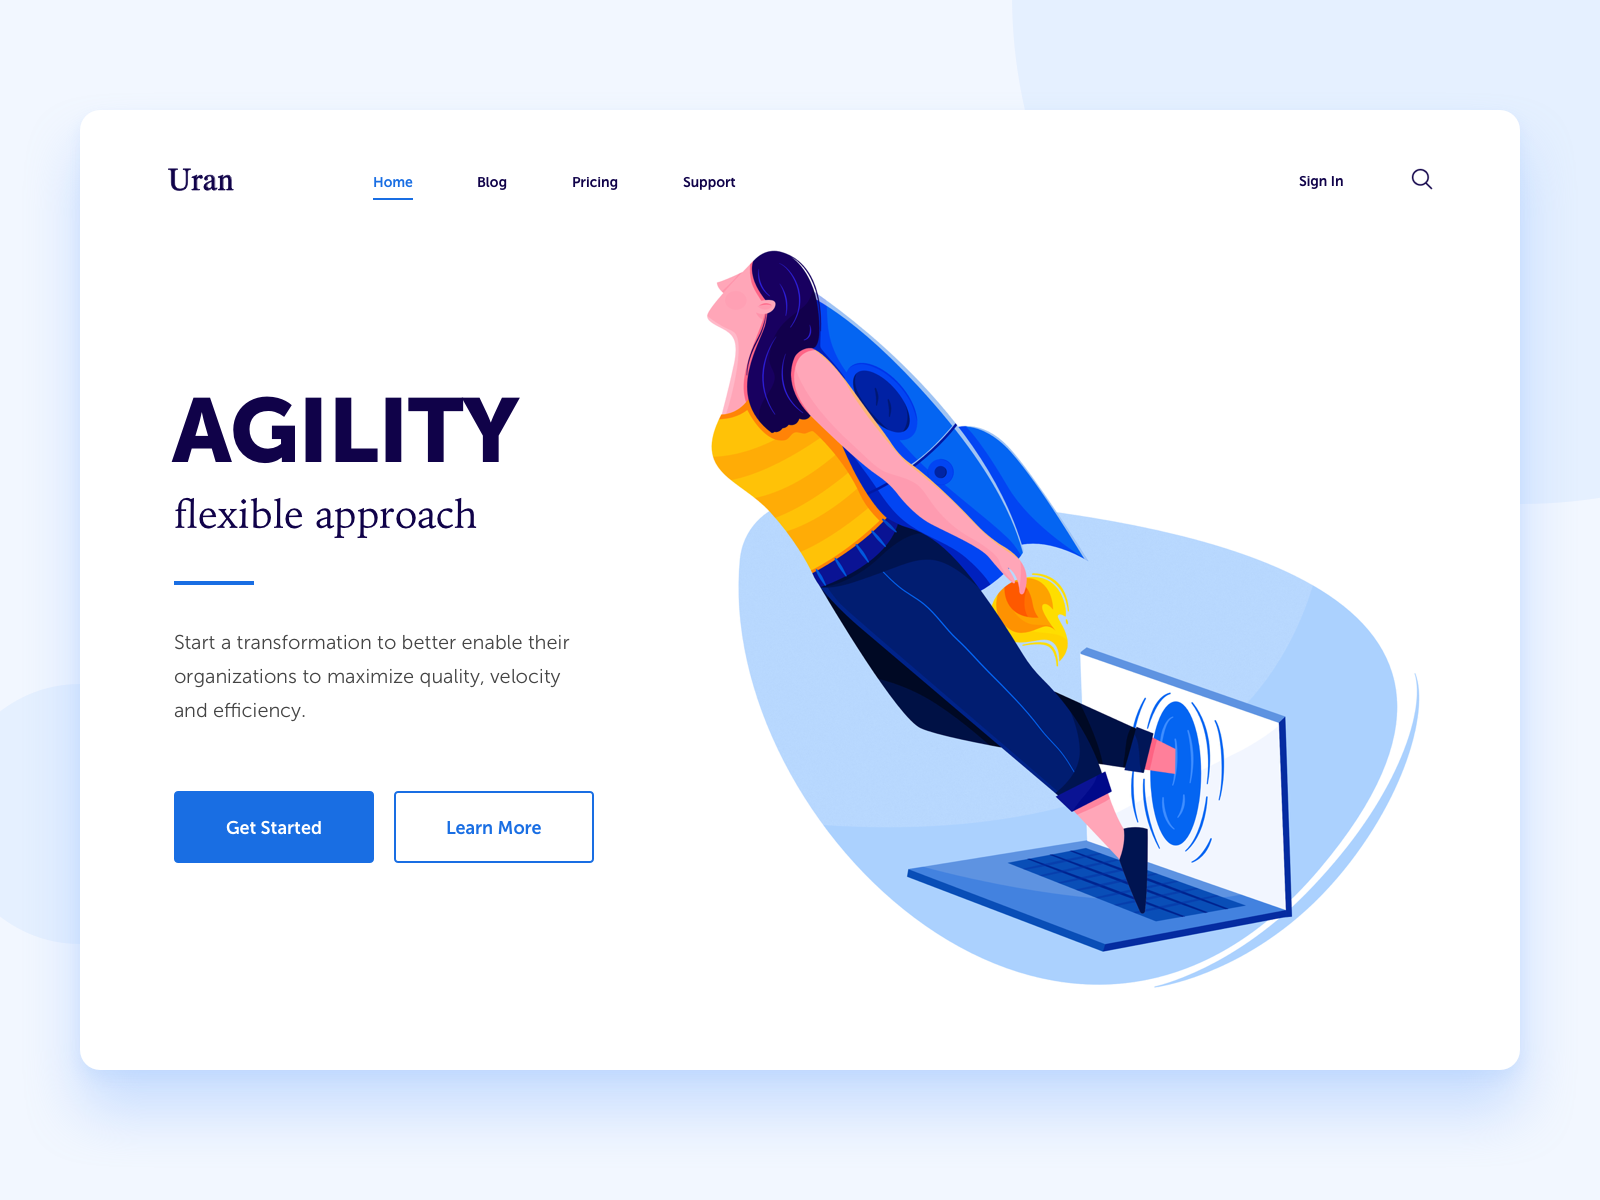 Agility affinity designer agility business character computer fast fly girl illustration lady laptop launch mainframe office people rocket technology uran woman work